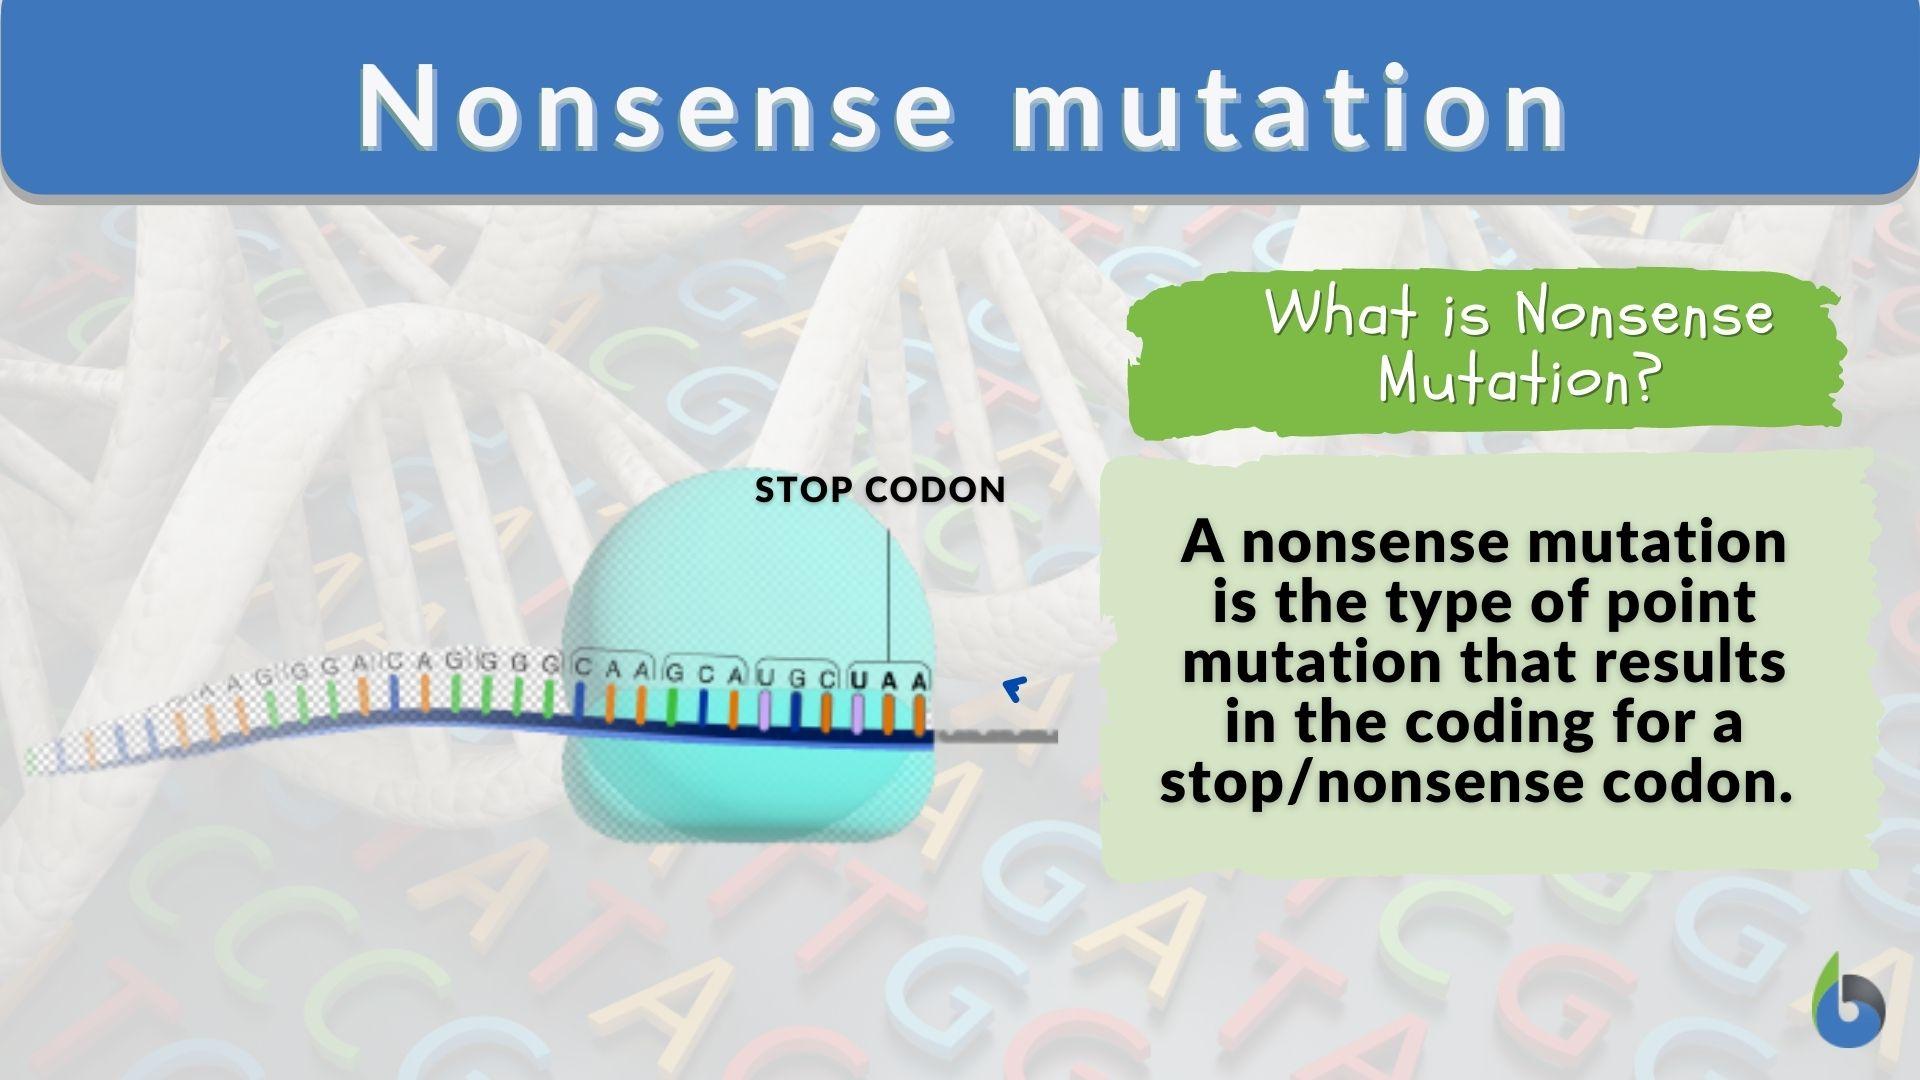 Nonsense mutation - Definition and Examples - Biology Online Dictionary